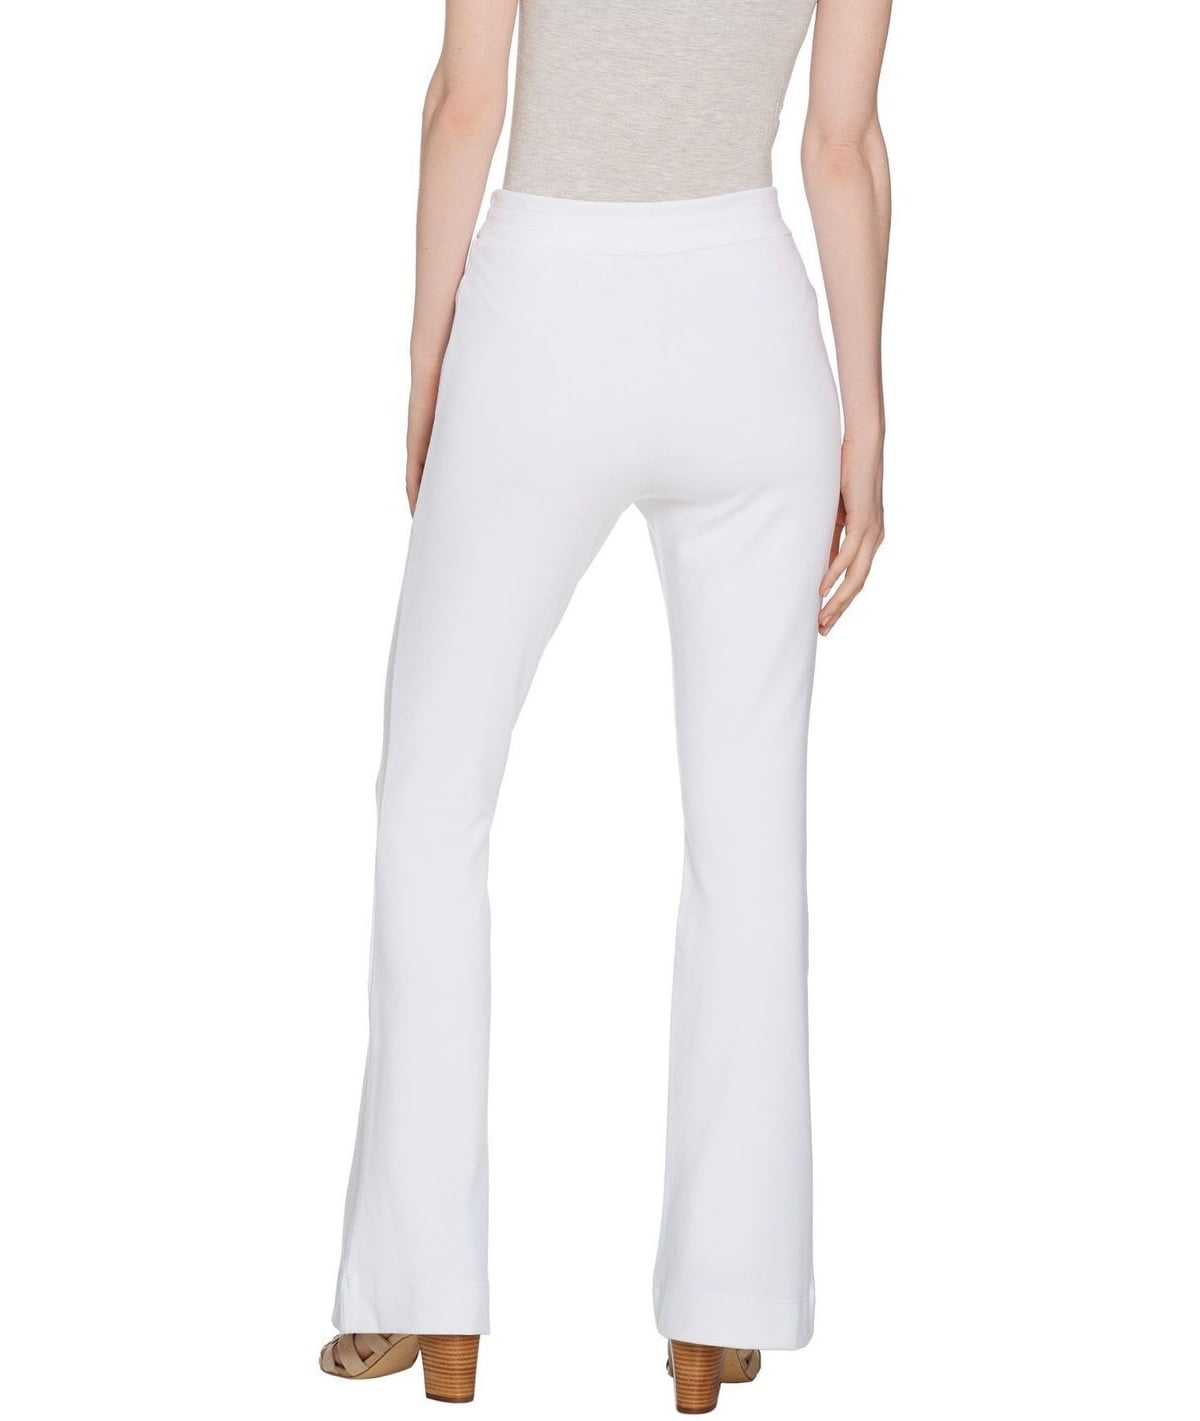 Lisa Rinna Collection Ponte Knit Flare Pants Elastic Waist White M NEW A289002